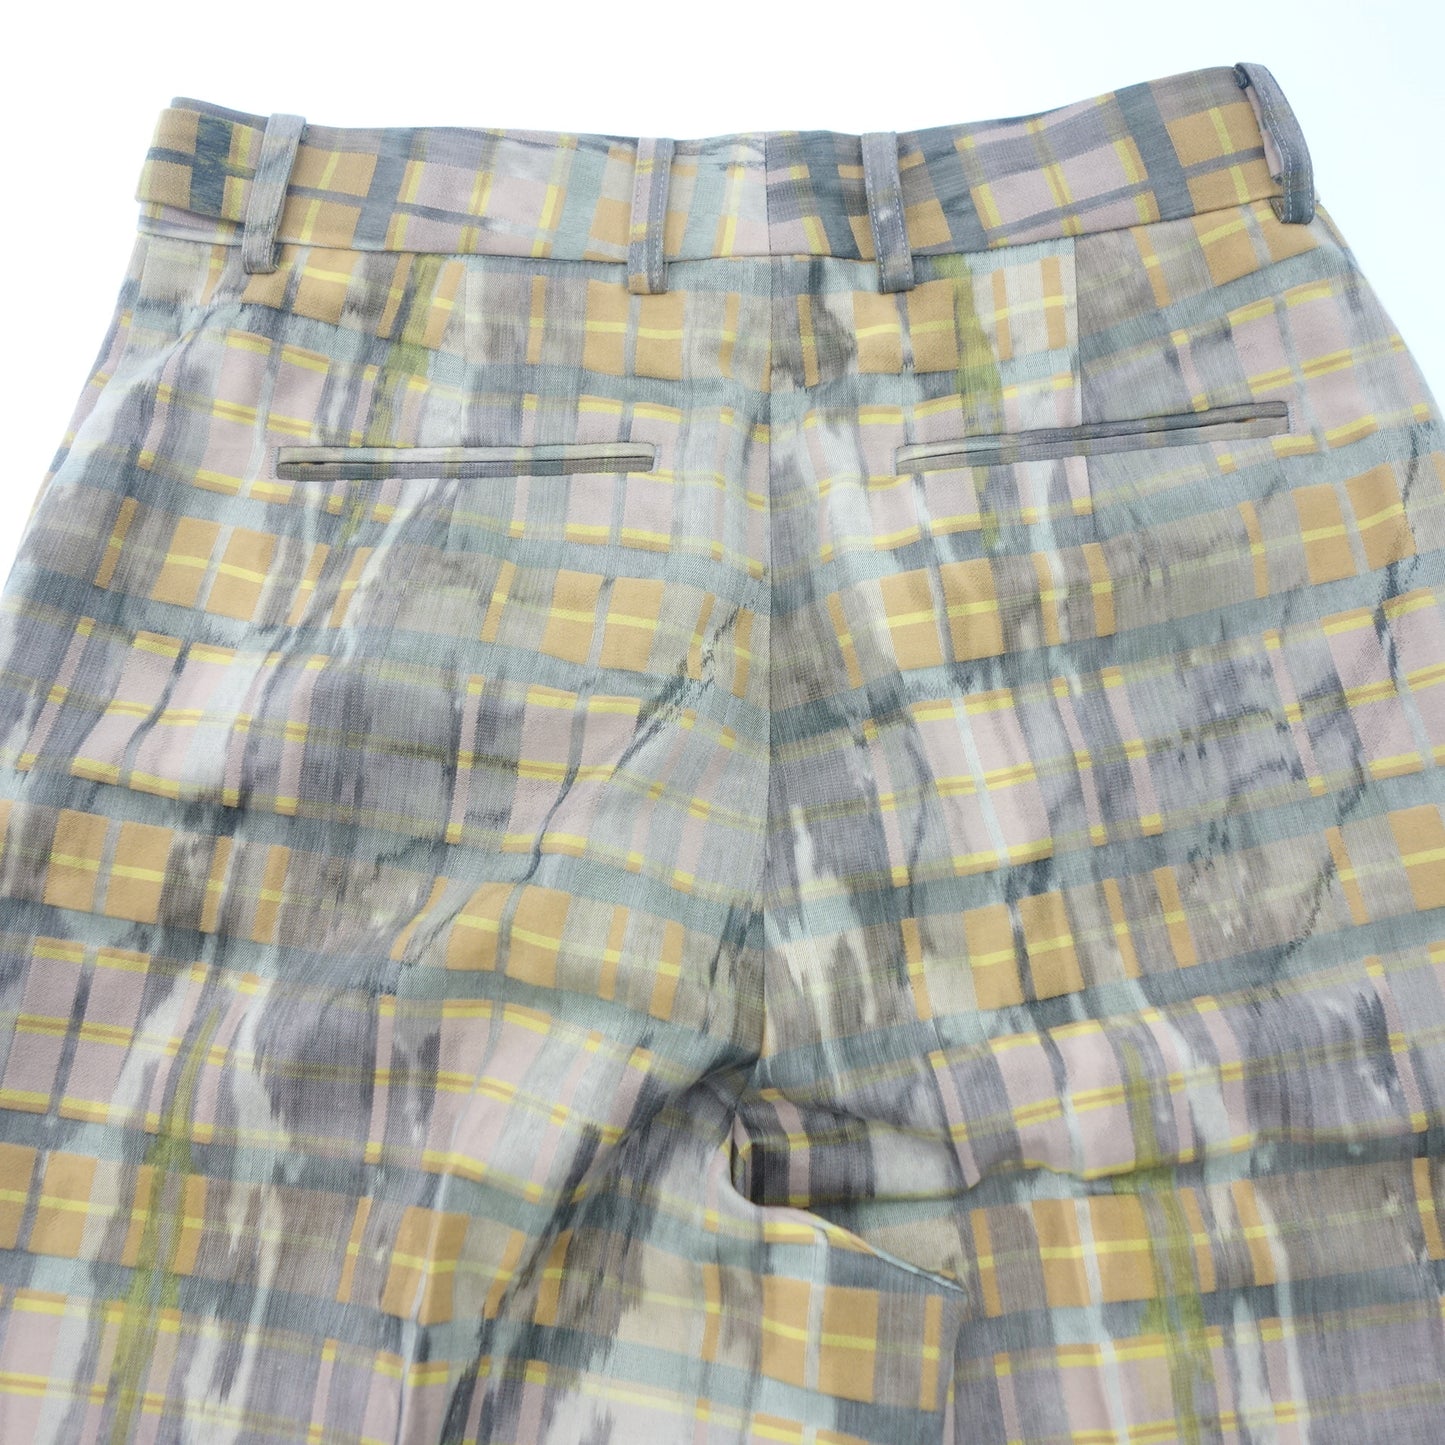 Good condition◆Cavan Camouflage Check Print Wide Pants Cotton Polyester Women's Yellow Size Unknown CABaN [AFB8] 